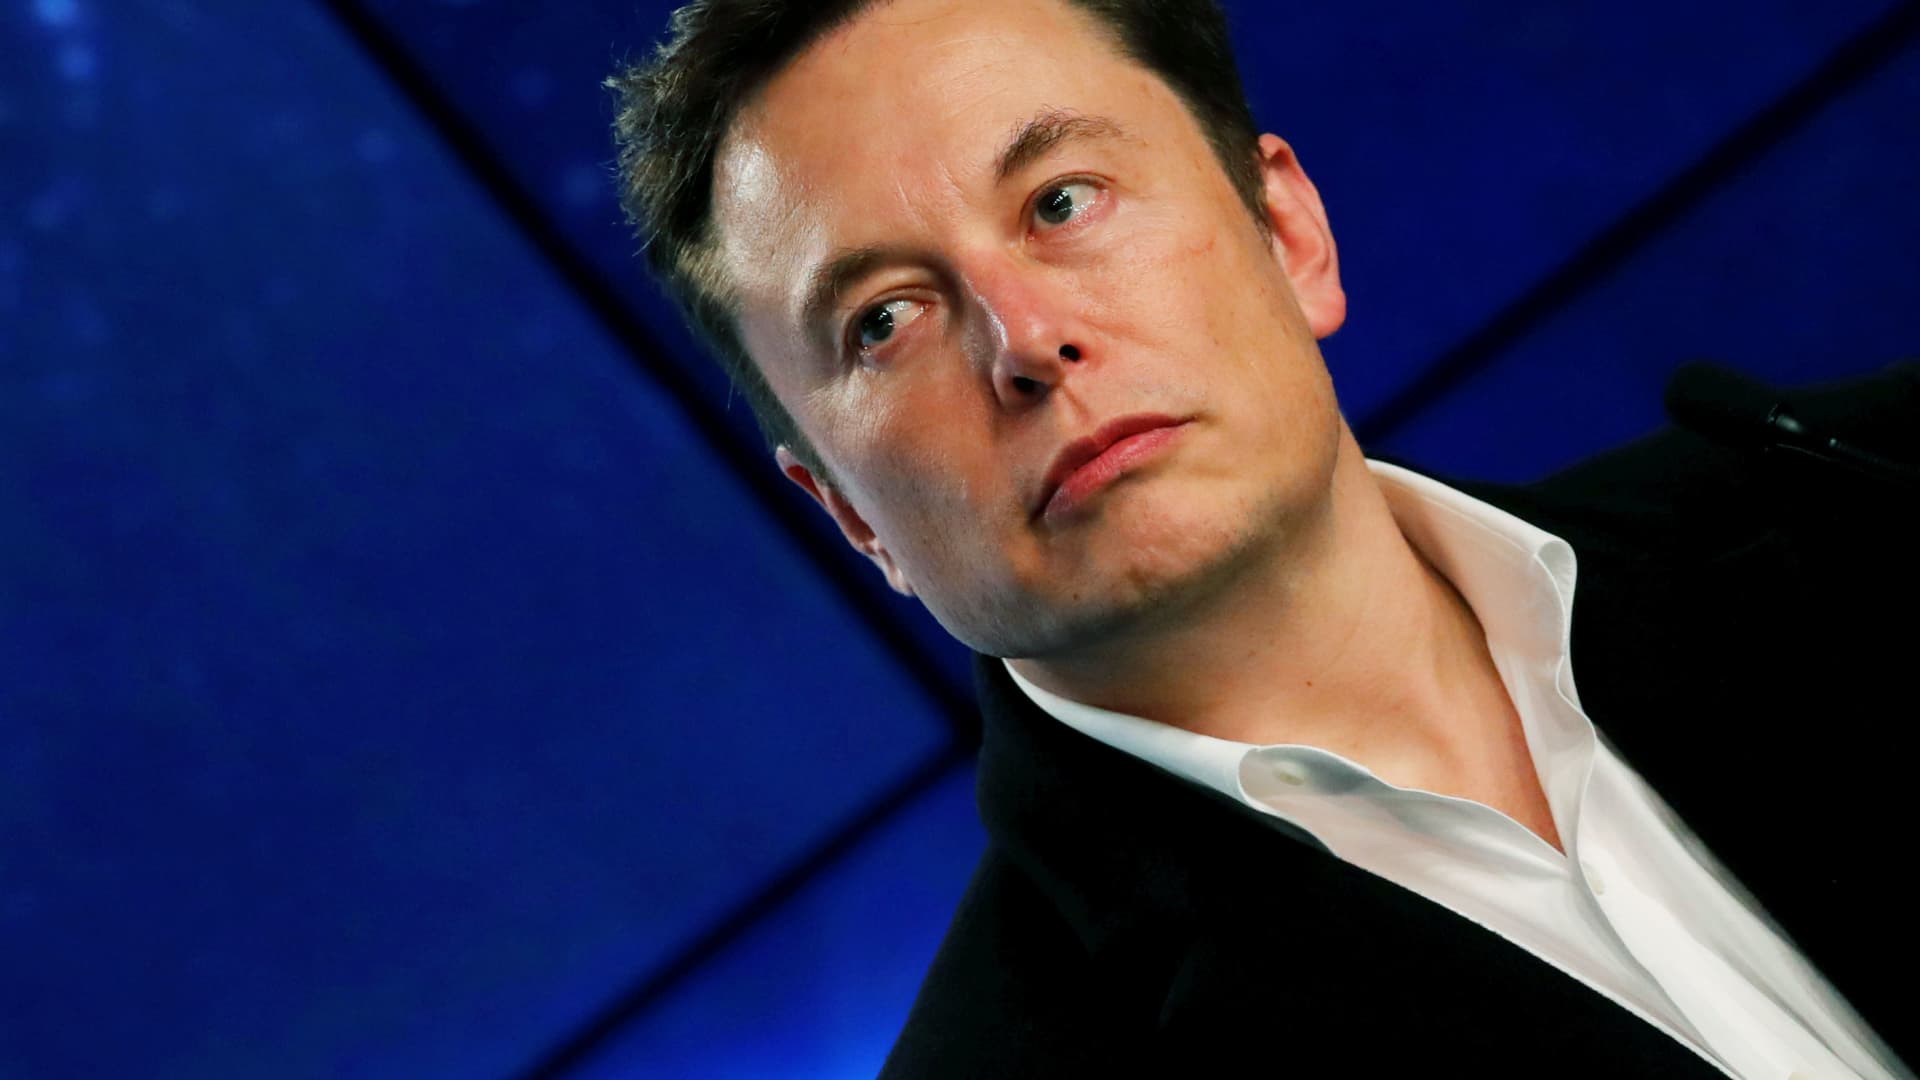 Tesla stock had its worst week since March 2020 during a 'very intense 7 days' for Elon Musk